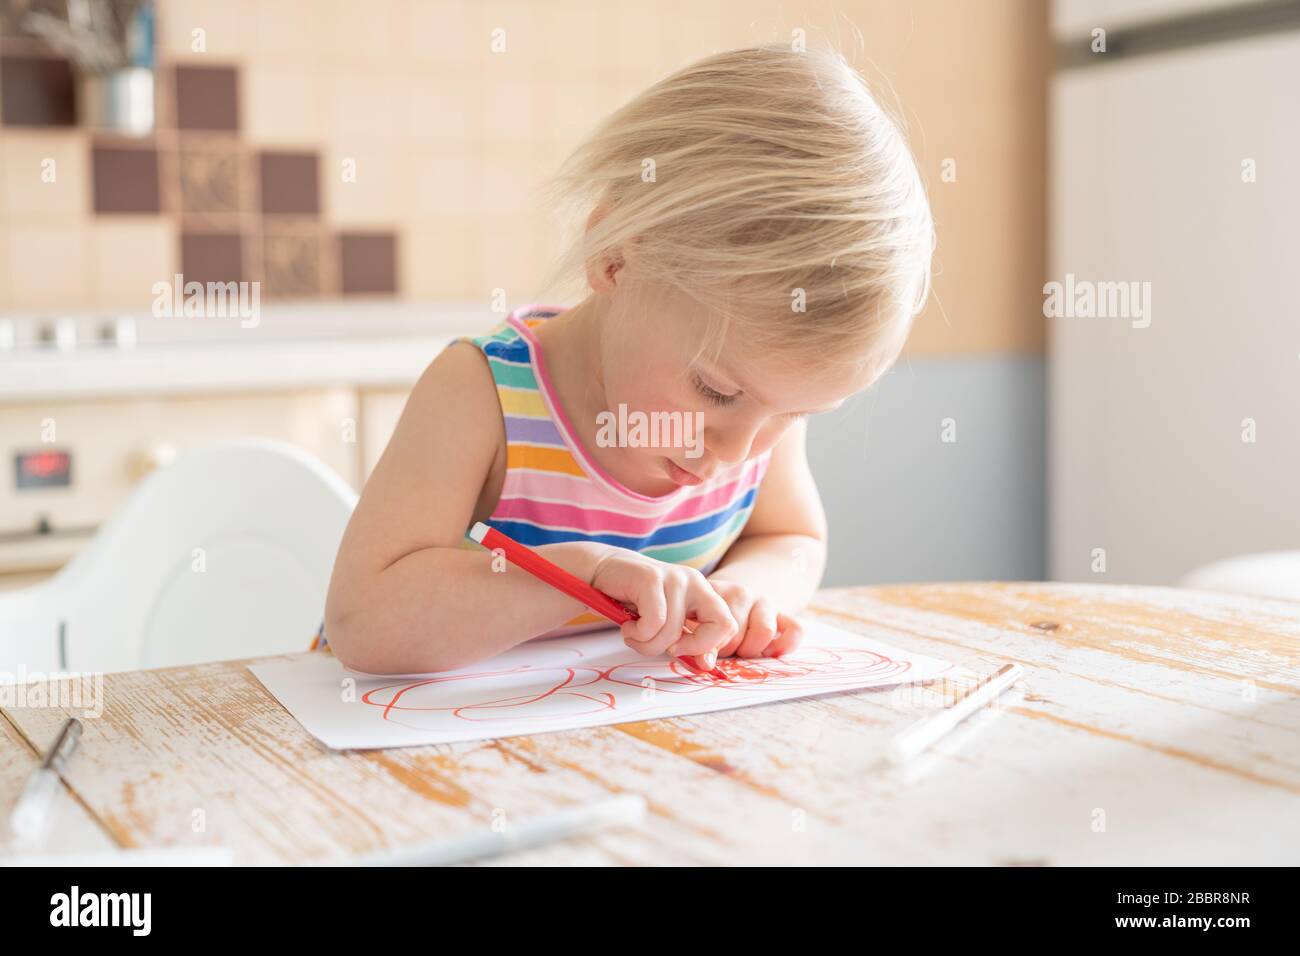 Covid lockdown - girl learns to draw online during self-isolation Stock Photo